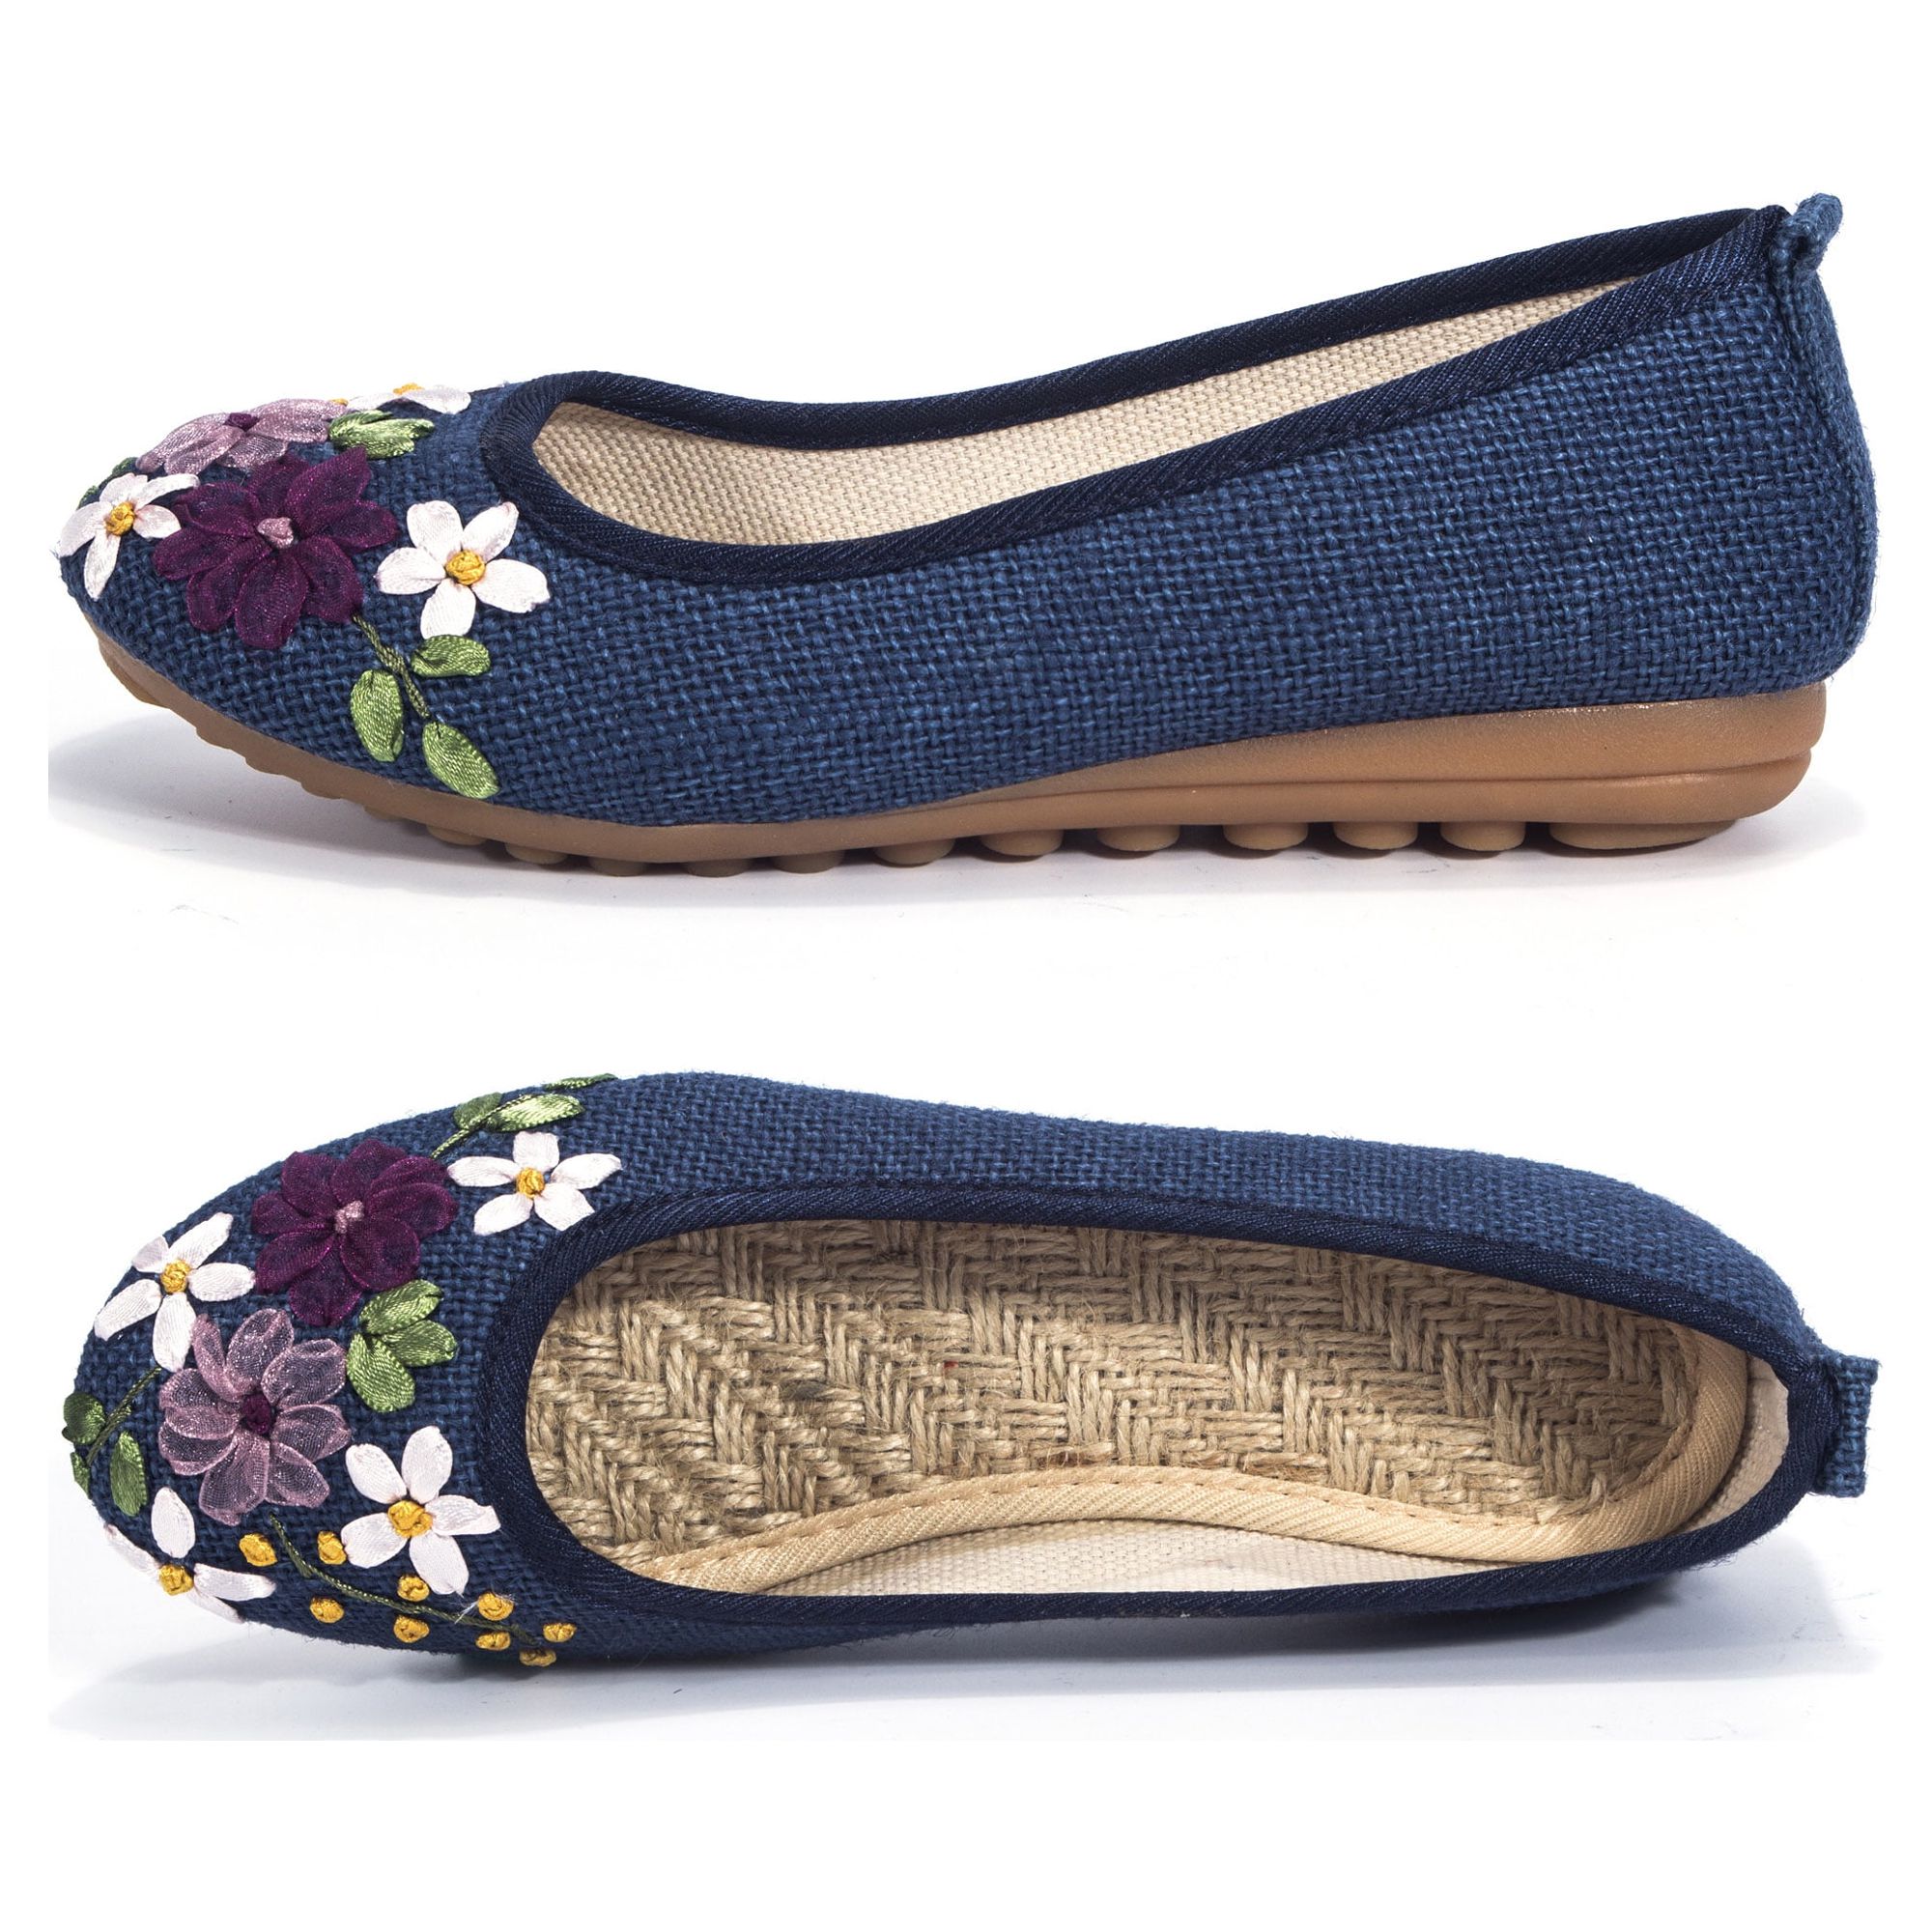 DODOING Women's Casual Fit Flat Office Shoes Non-Slip Flat Walking Shoes with Delicate Embroidery Flower Slip On Flats Shoes Round Toe Ballet Flats (4-10 Size)-Navy Blue - image 3 of 7